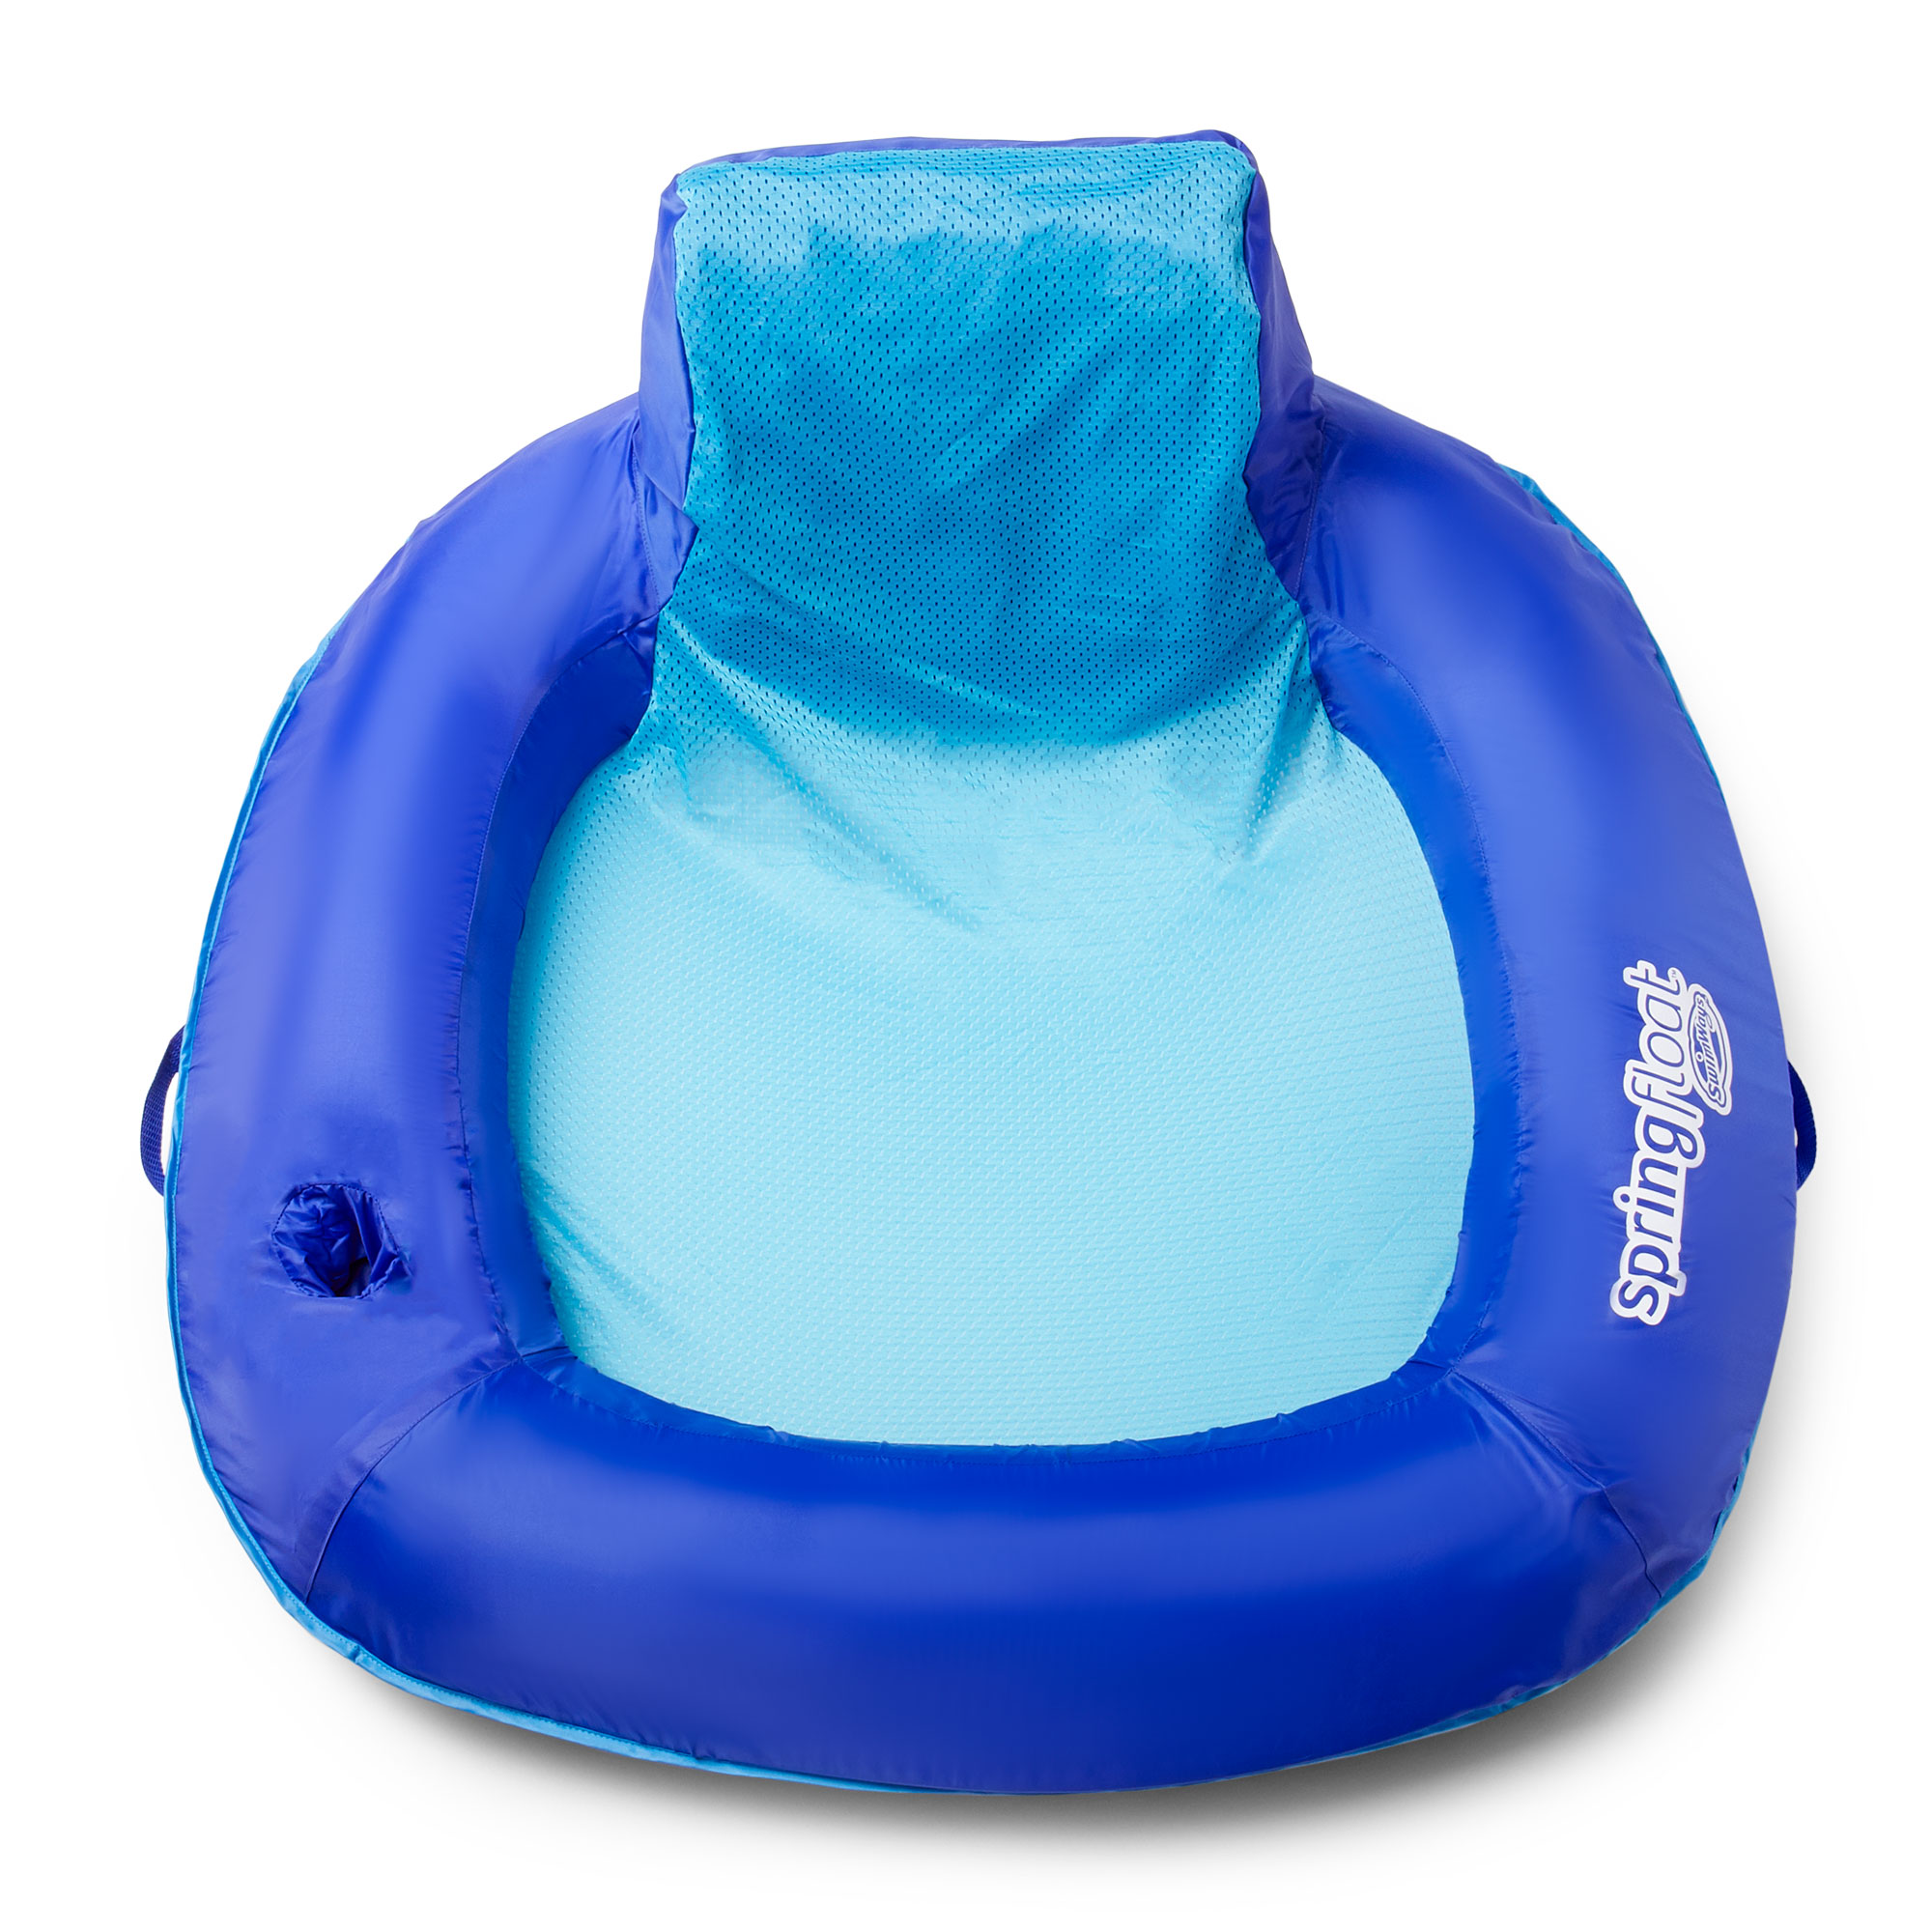 SwimWays SunSeat Floating Inflatable Swimming Pool Lounge Chair w/Armrests, Backrests, and Cup Holder, Dark Blue - image 3 of 8